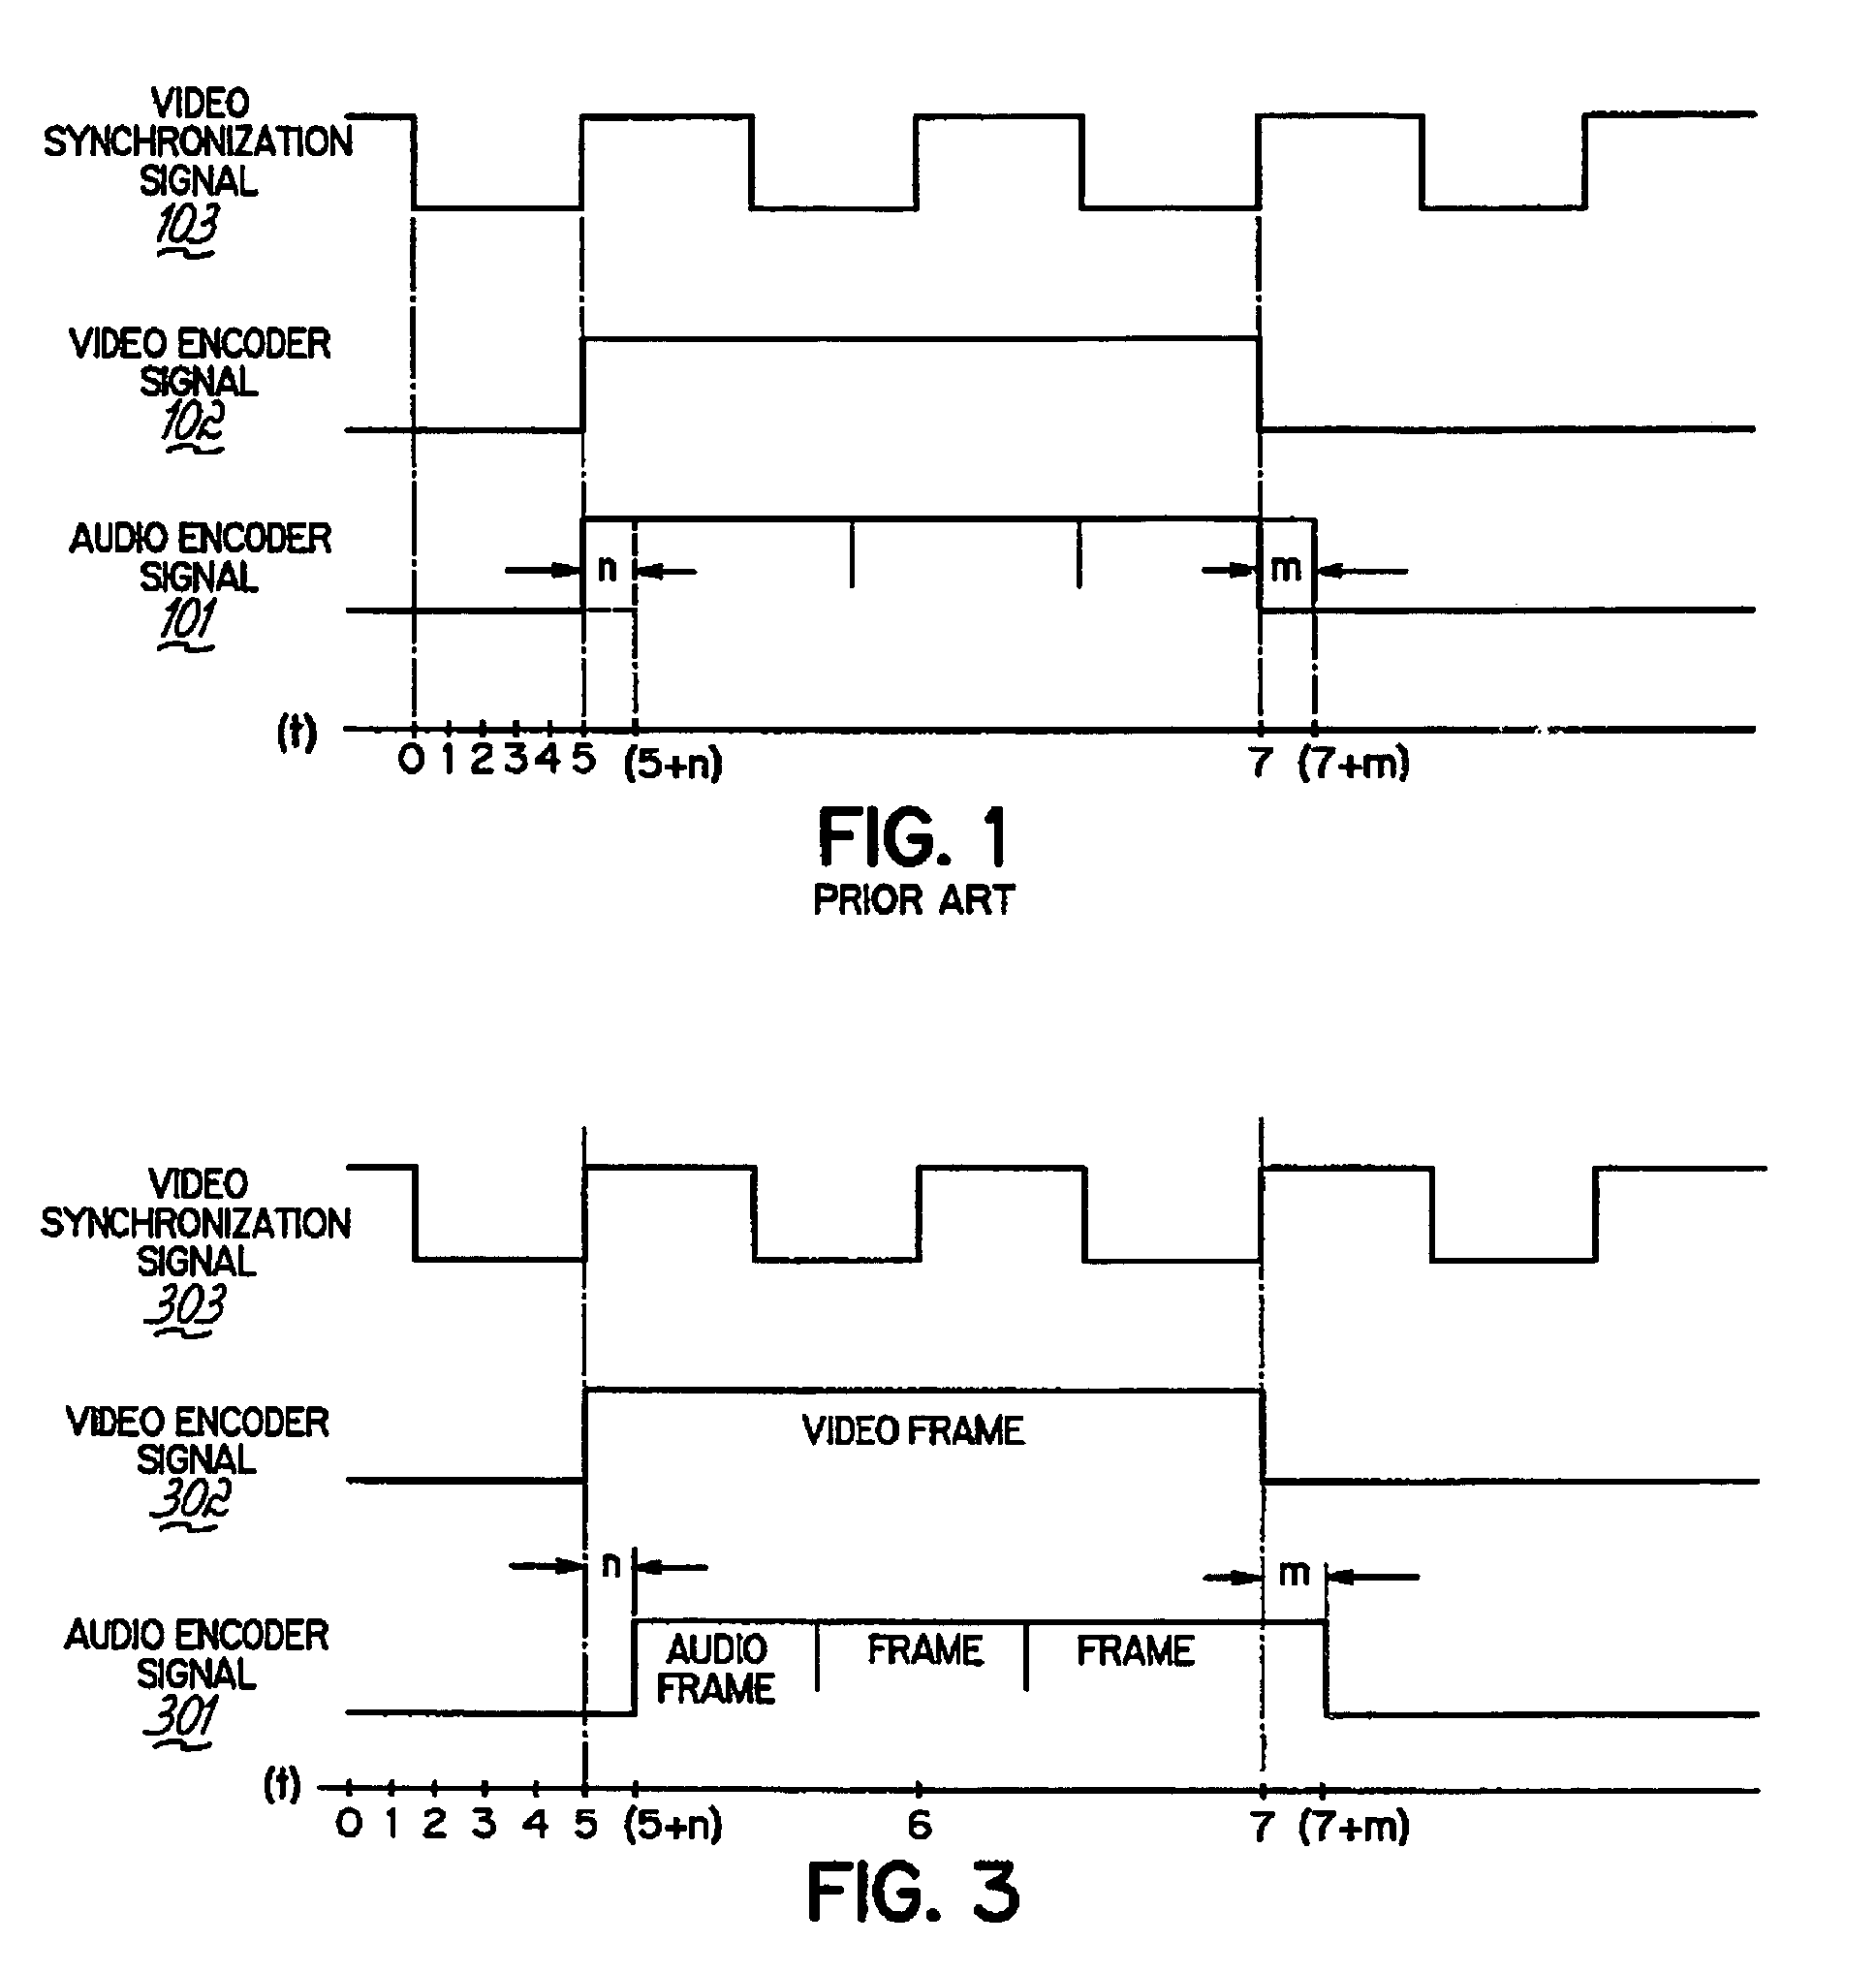 Start/stop audio encoder apparatus and method for synchronizing digital audio and video signals